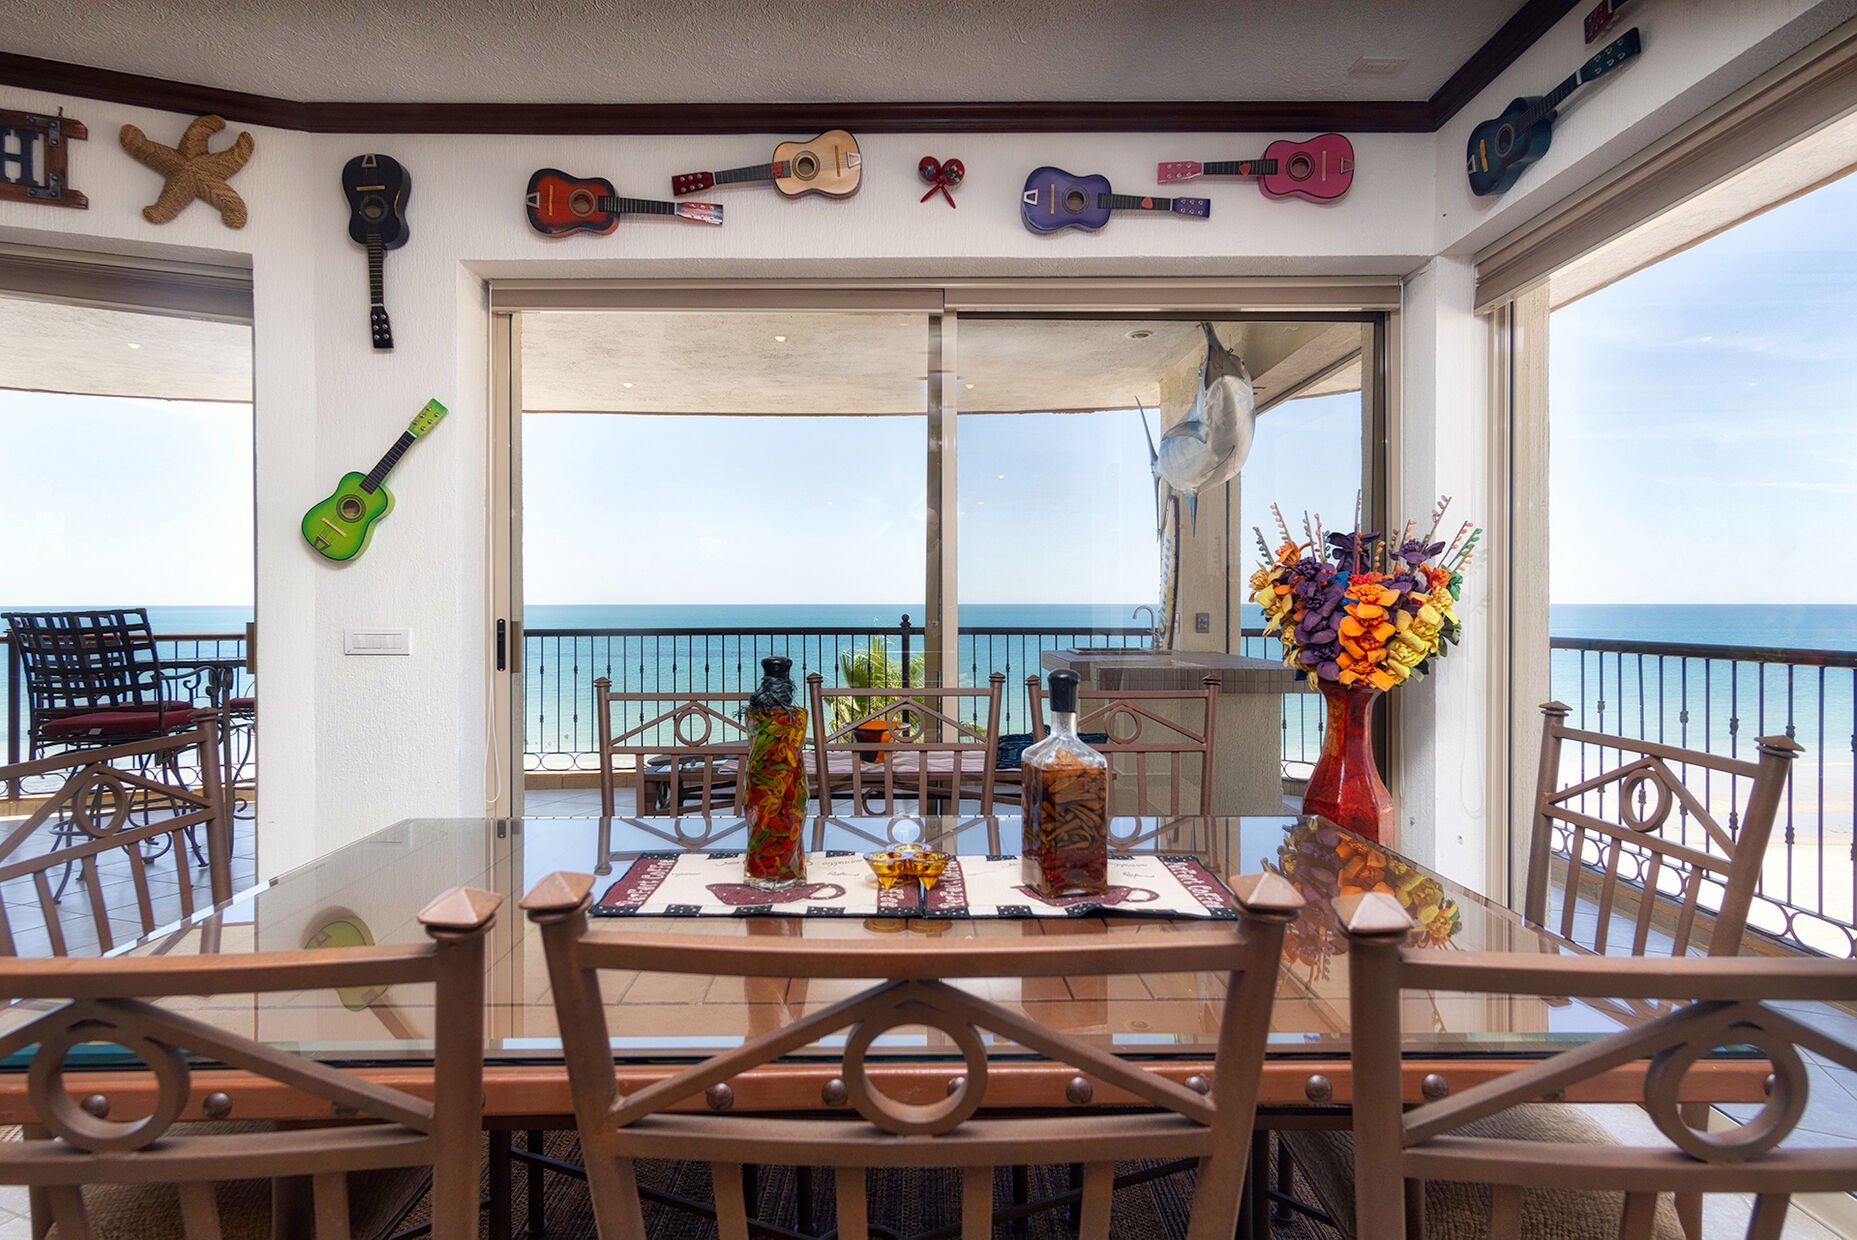 The dining table takes in expansive views, and is colorful and very 'Mexican'.